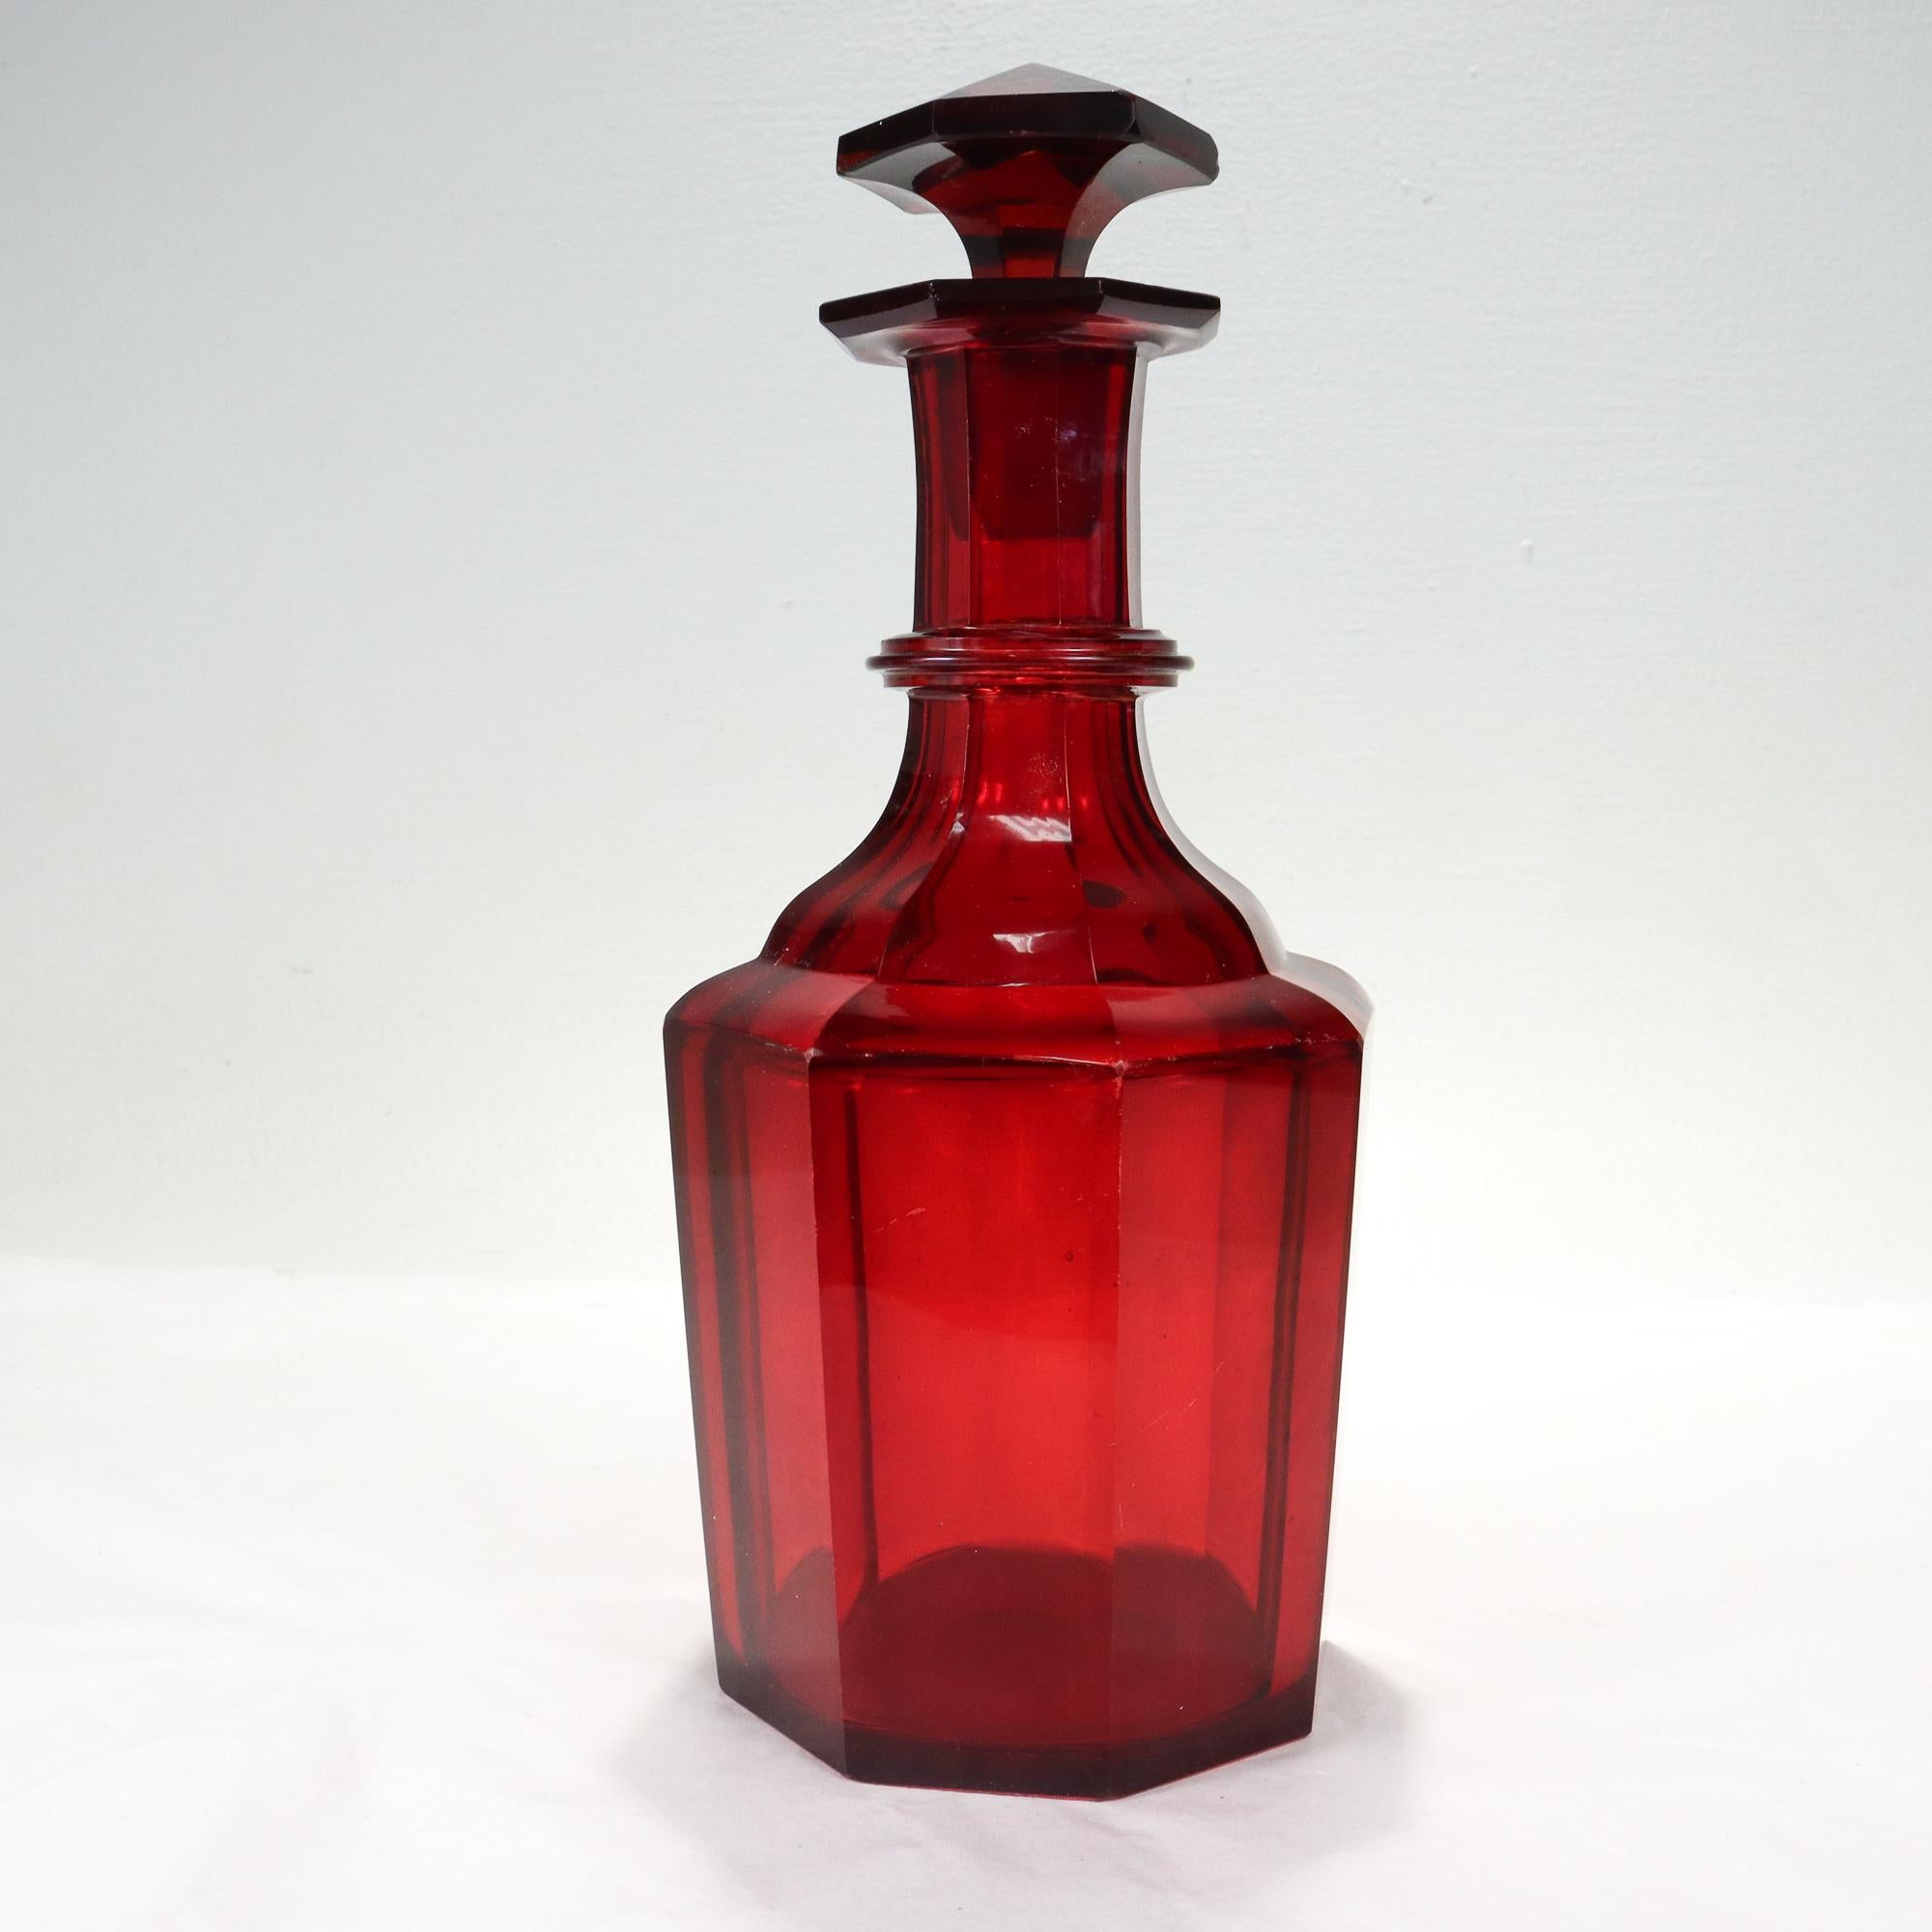 A fine antique wine decanter.

Likely English in origin.

In ruby red cut glass with 8 faceted sides, with an applied ring to its neck, and with a conforming stopper. 

The base has a polished pontil mark and an old sticker. 

Matching painted 'X's